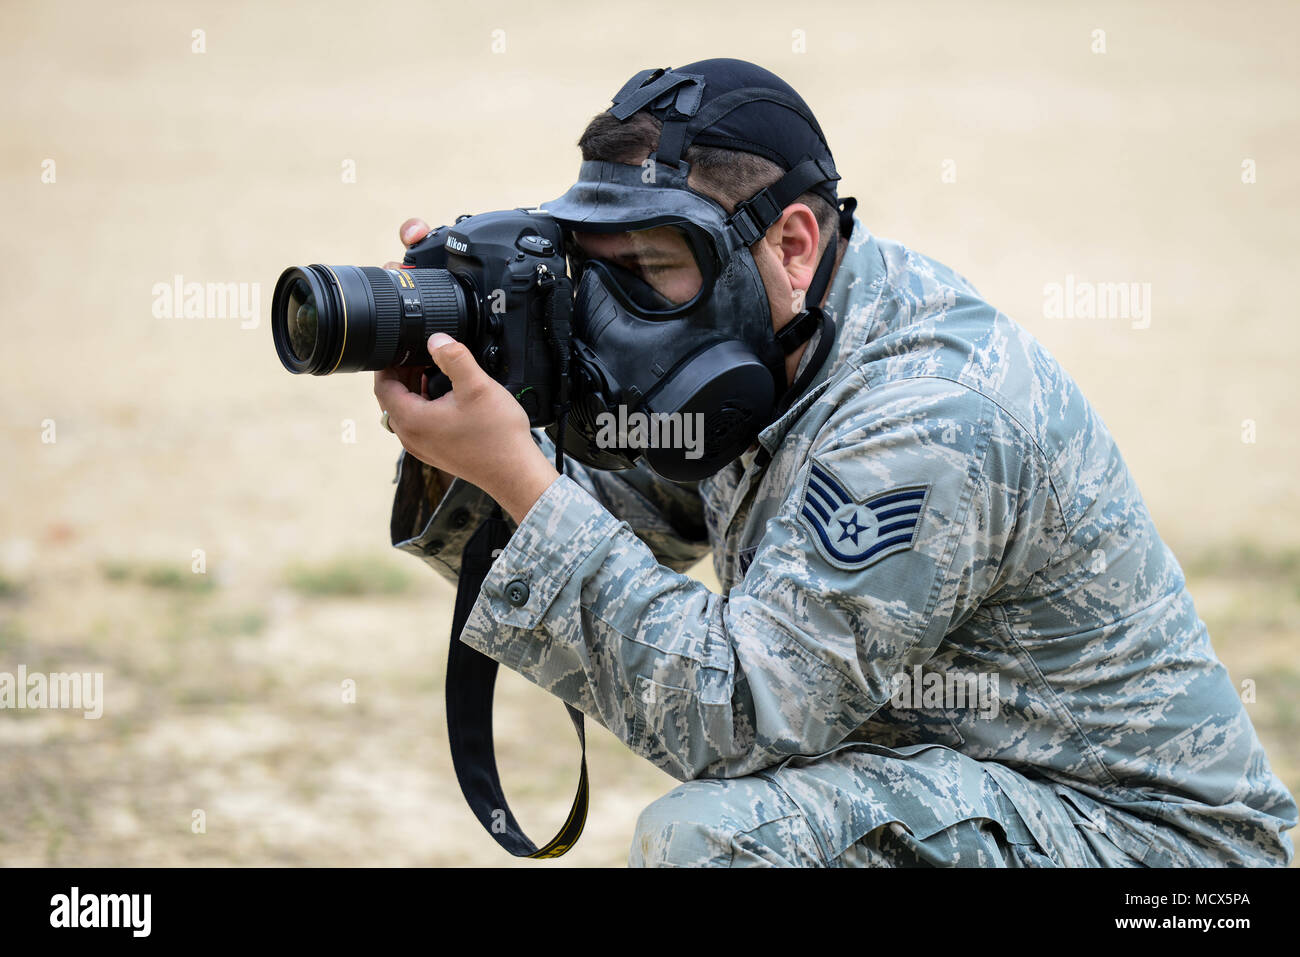 Staff Sgt. Agustin G. Salazar, a public affairs specialist with the 149th Fighter Wing, takes photos of competitors during the 2018 Texas Military Department Best Warrior Competition March 3, 2018, at Camp Swift in Bastrop, TX. The Best Warrior Competition brings together the best junior enlisted and noncommissioned officers from the Texas Air and Army National Guards to compete for the prestigious title. (Air National Guard Photos by Staff Sgt. Daniel J. Martinez) Stock Photo